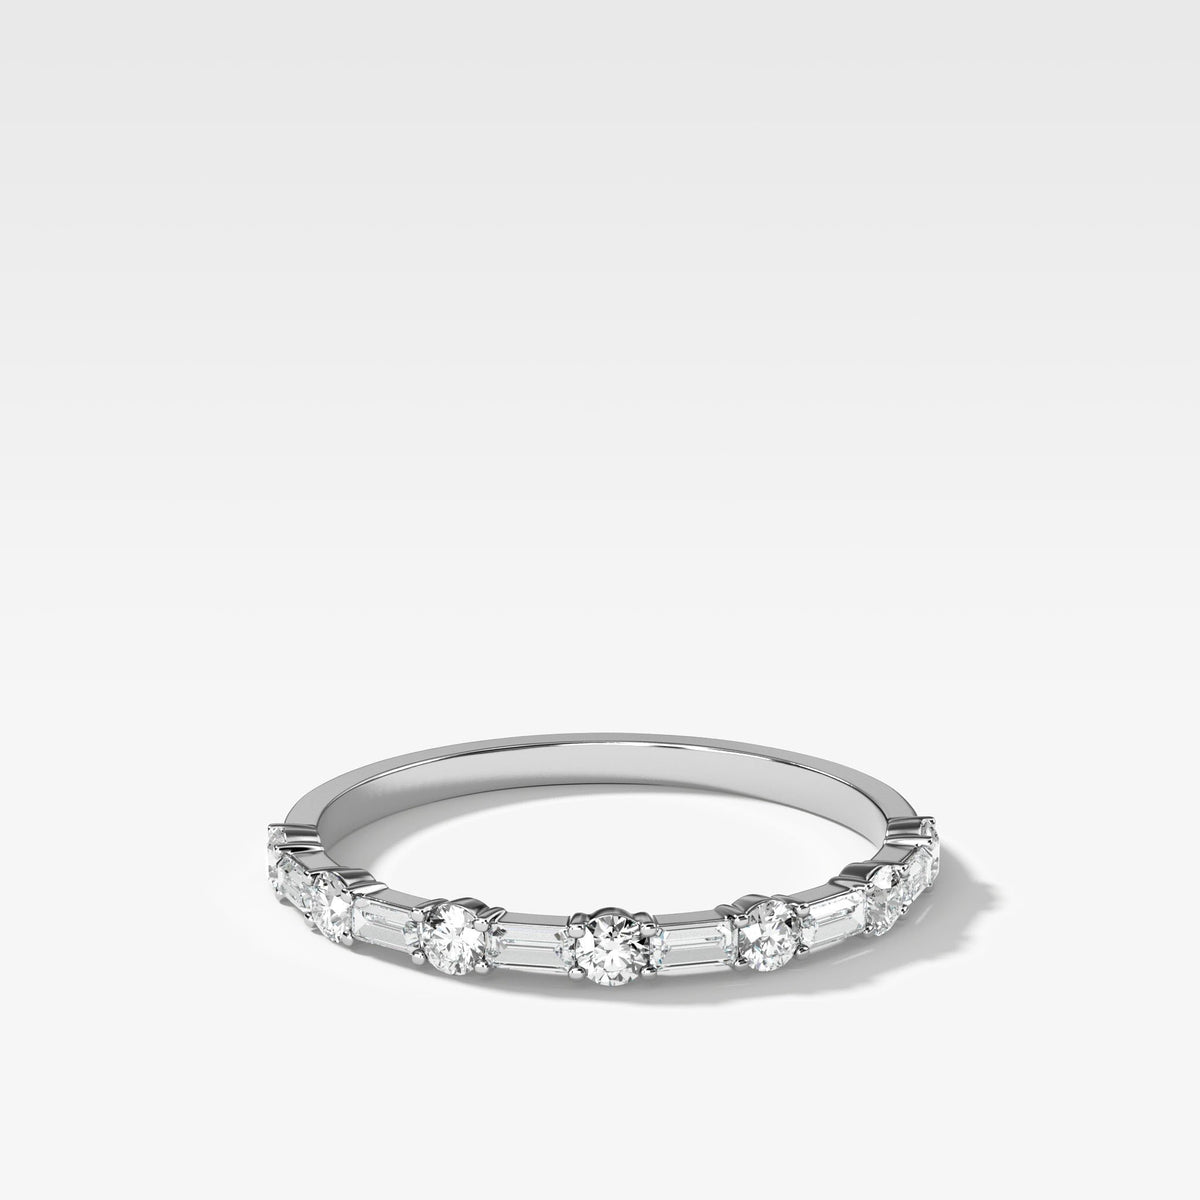 Scorpio Baguette Diamond Wedding Band by Good Stone in White Gold